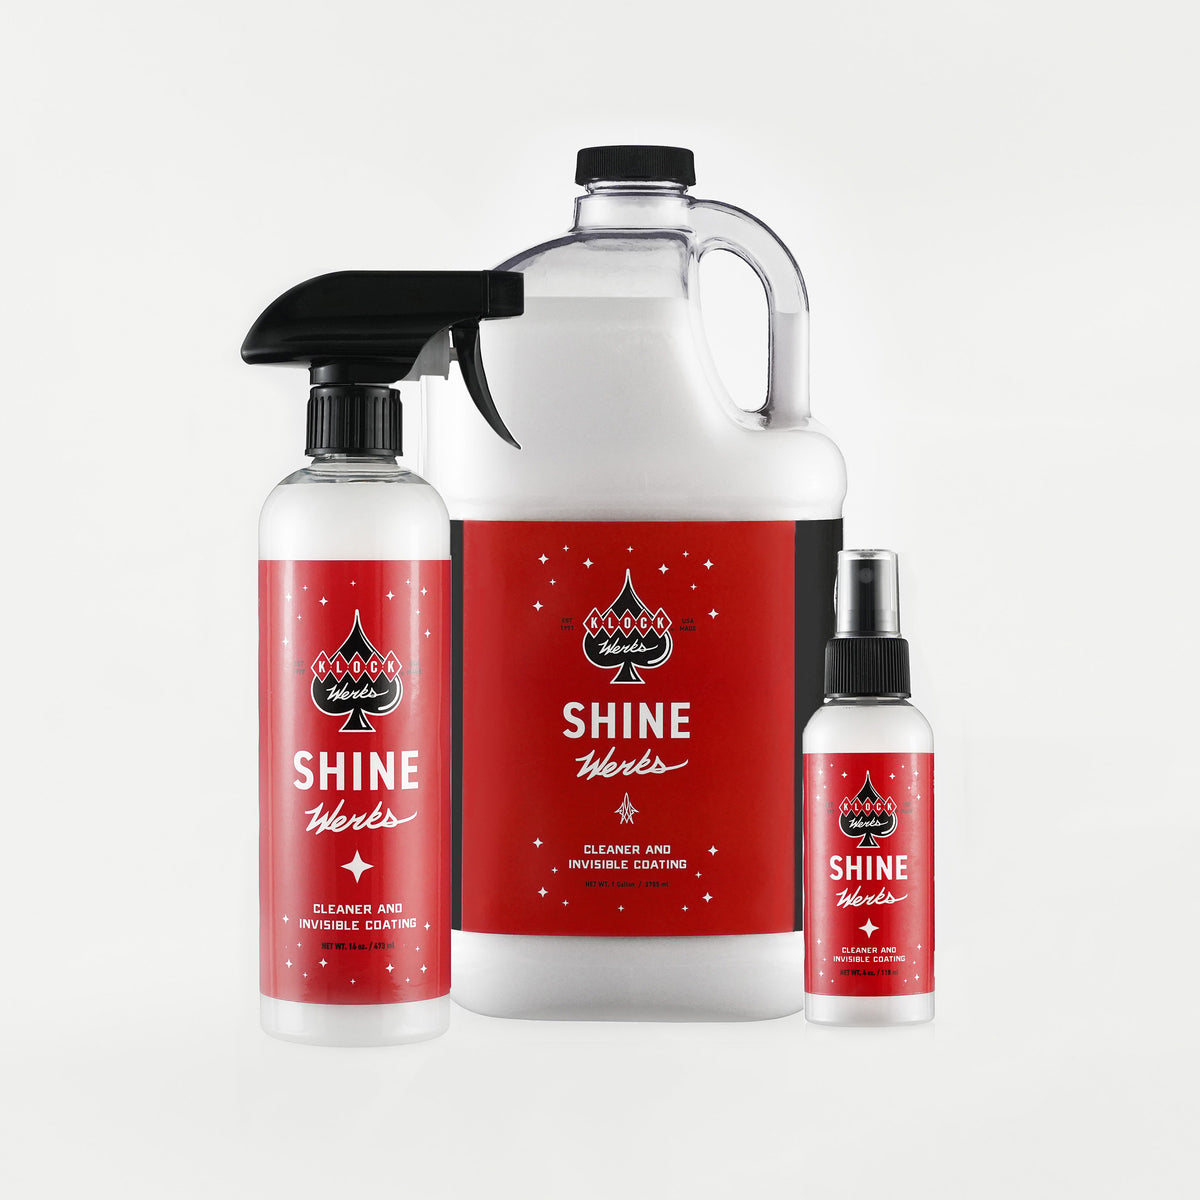 Shine Werks cleaning products complete lineup